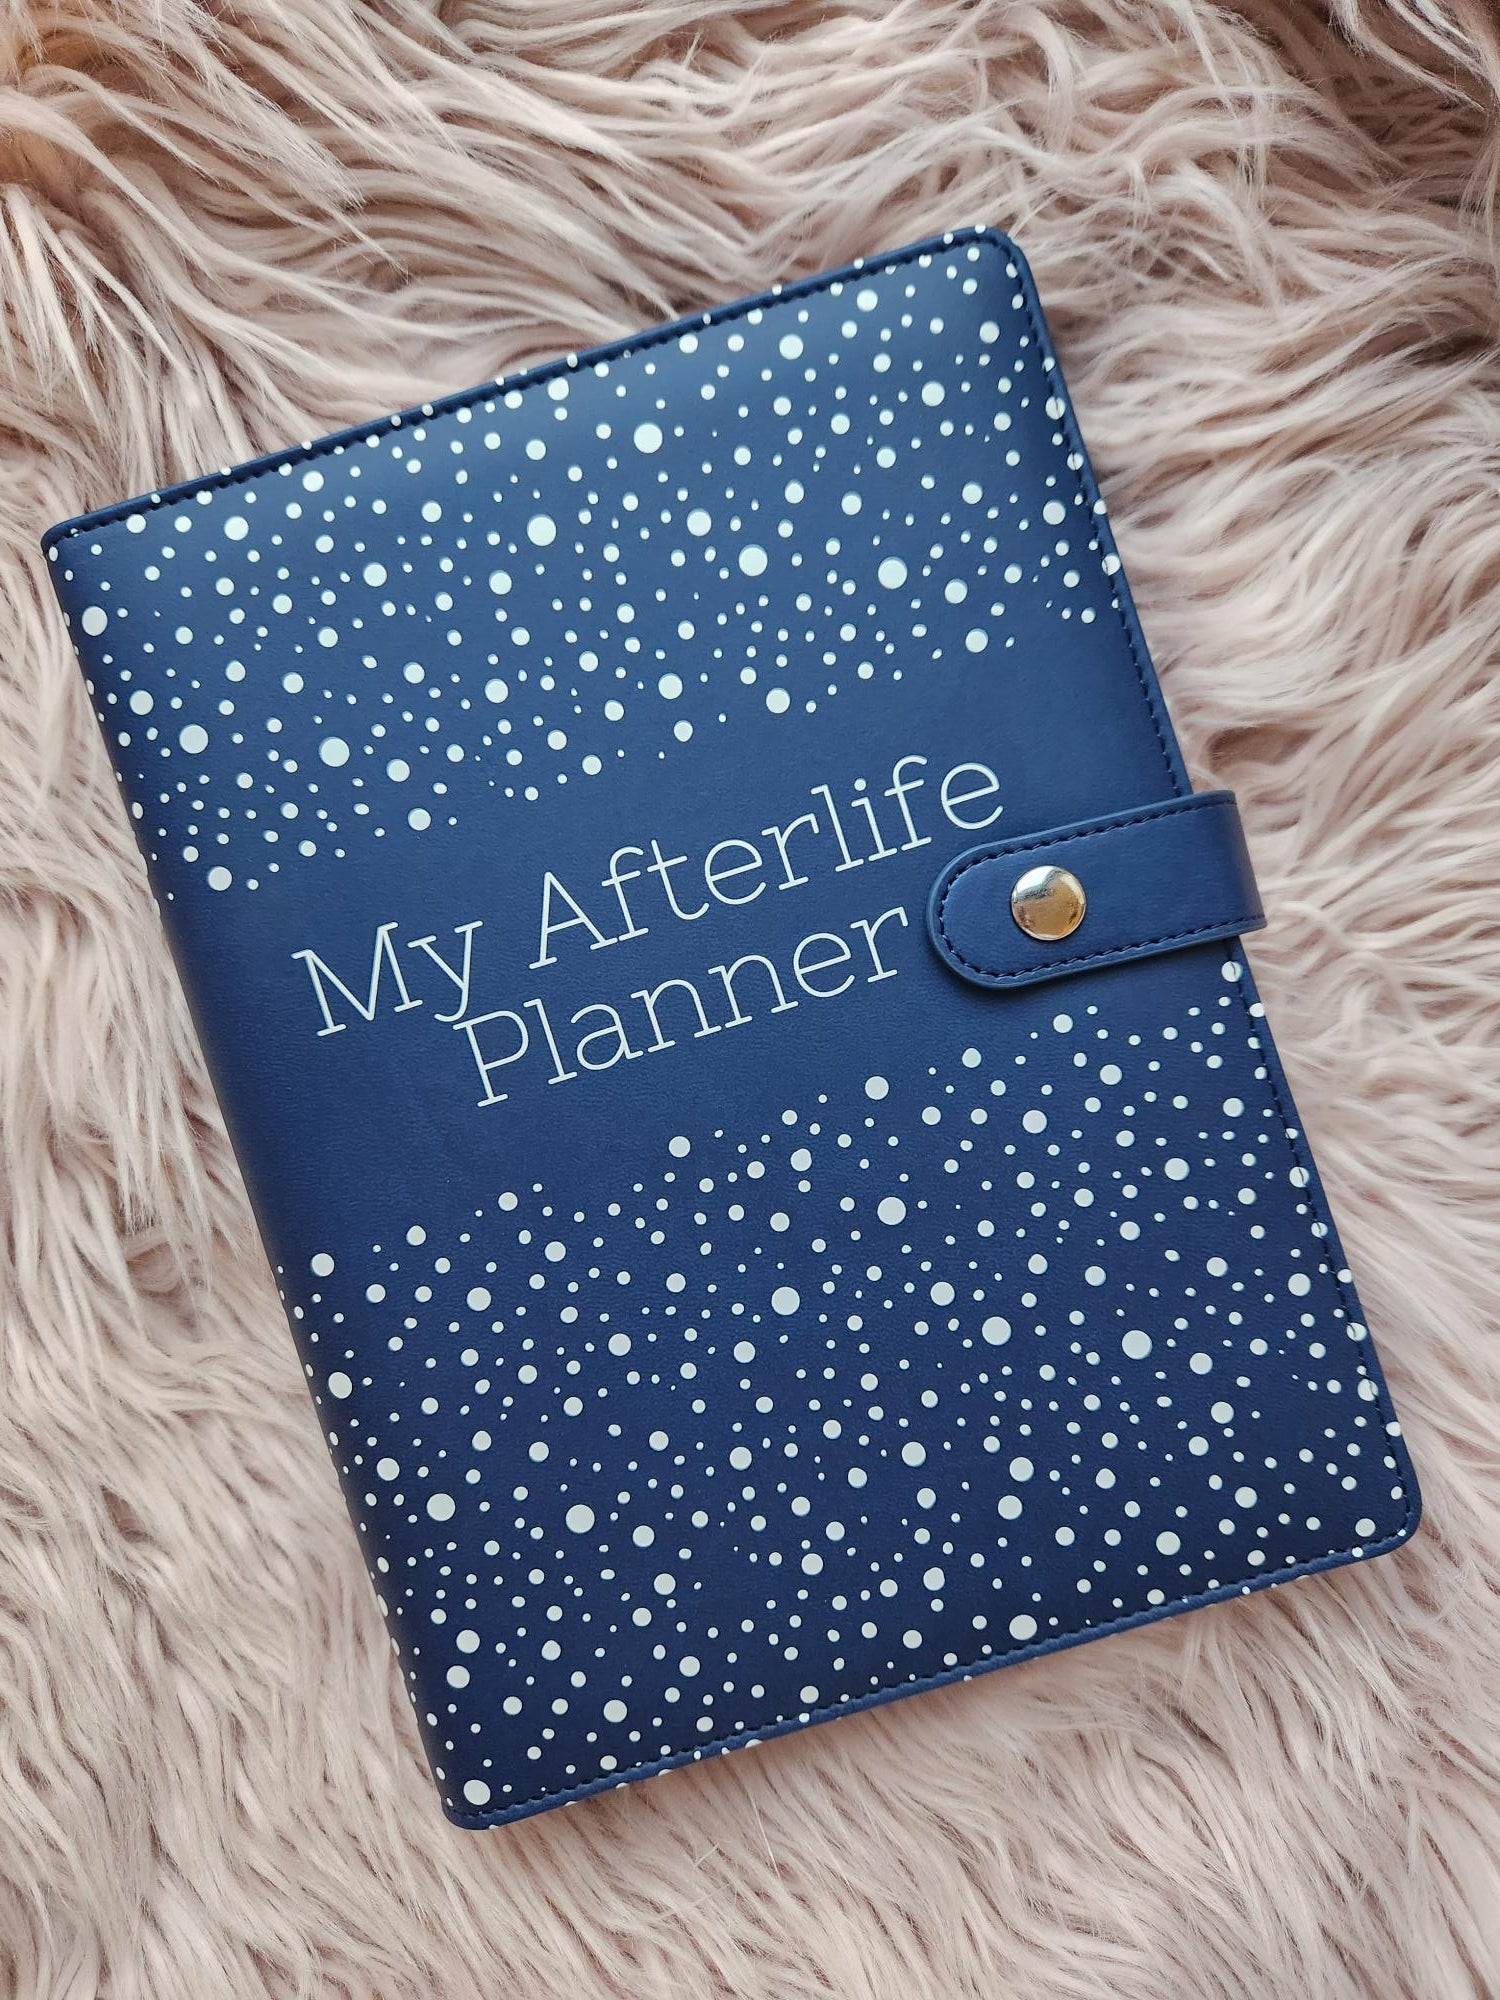 A5 Pu Leather Planner - Navy Blue NEW SHADE – My Afterlife Planner